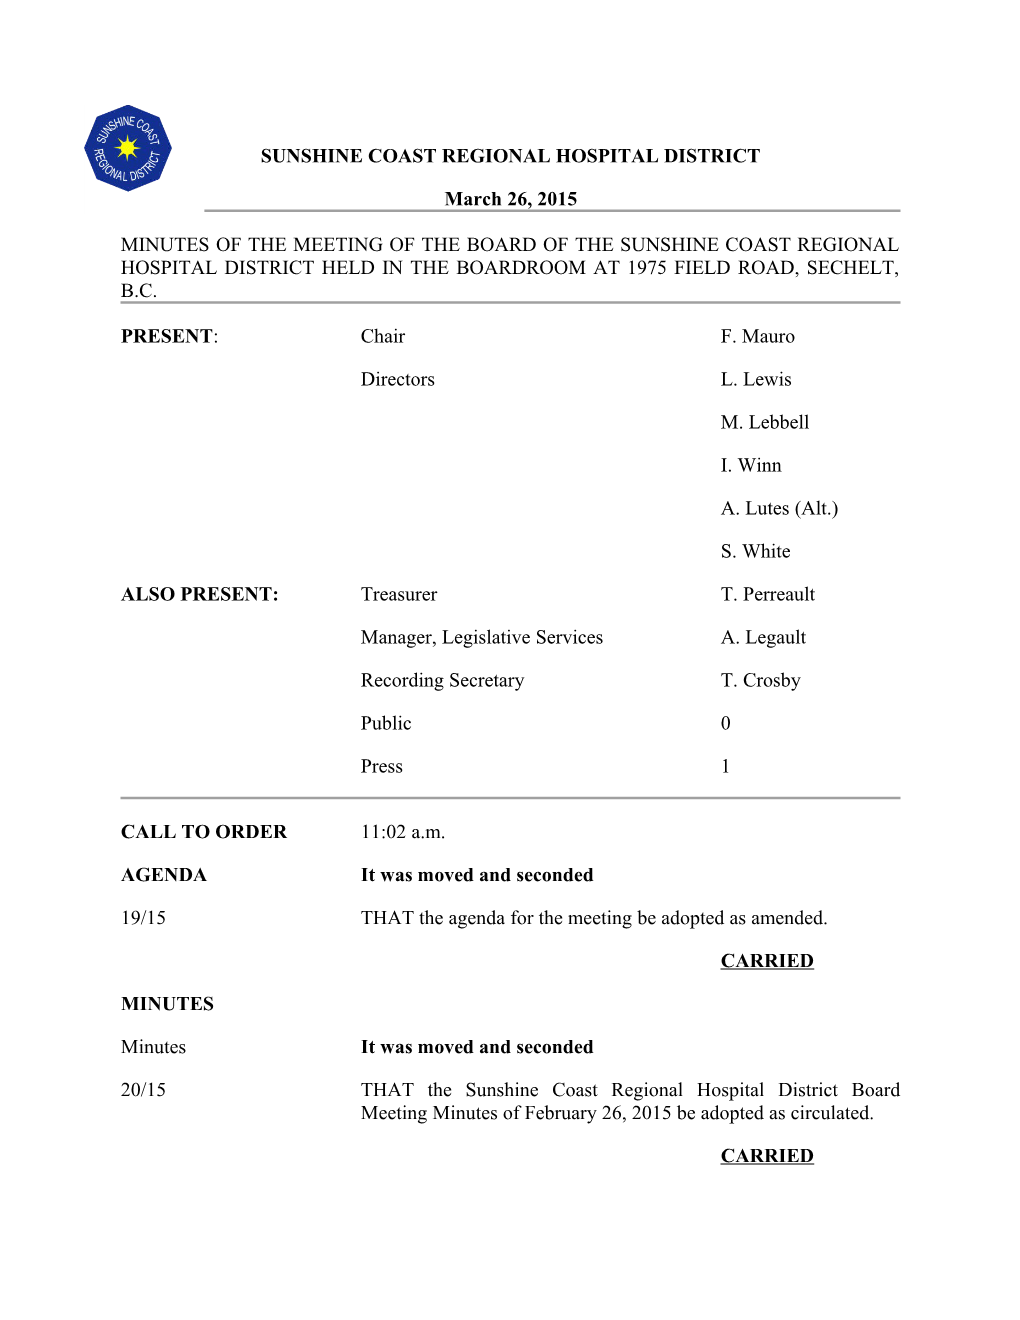 Sunshine Coast Regional Hospital District Board Meeting Minutes of March 26, 2015Page 1